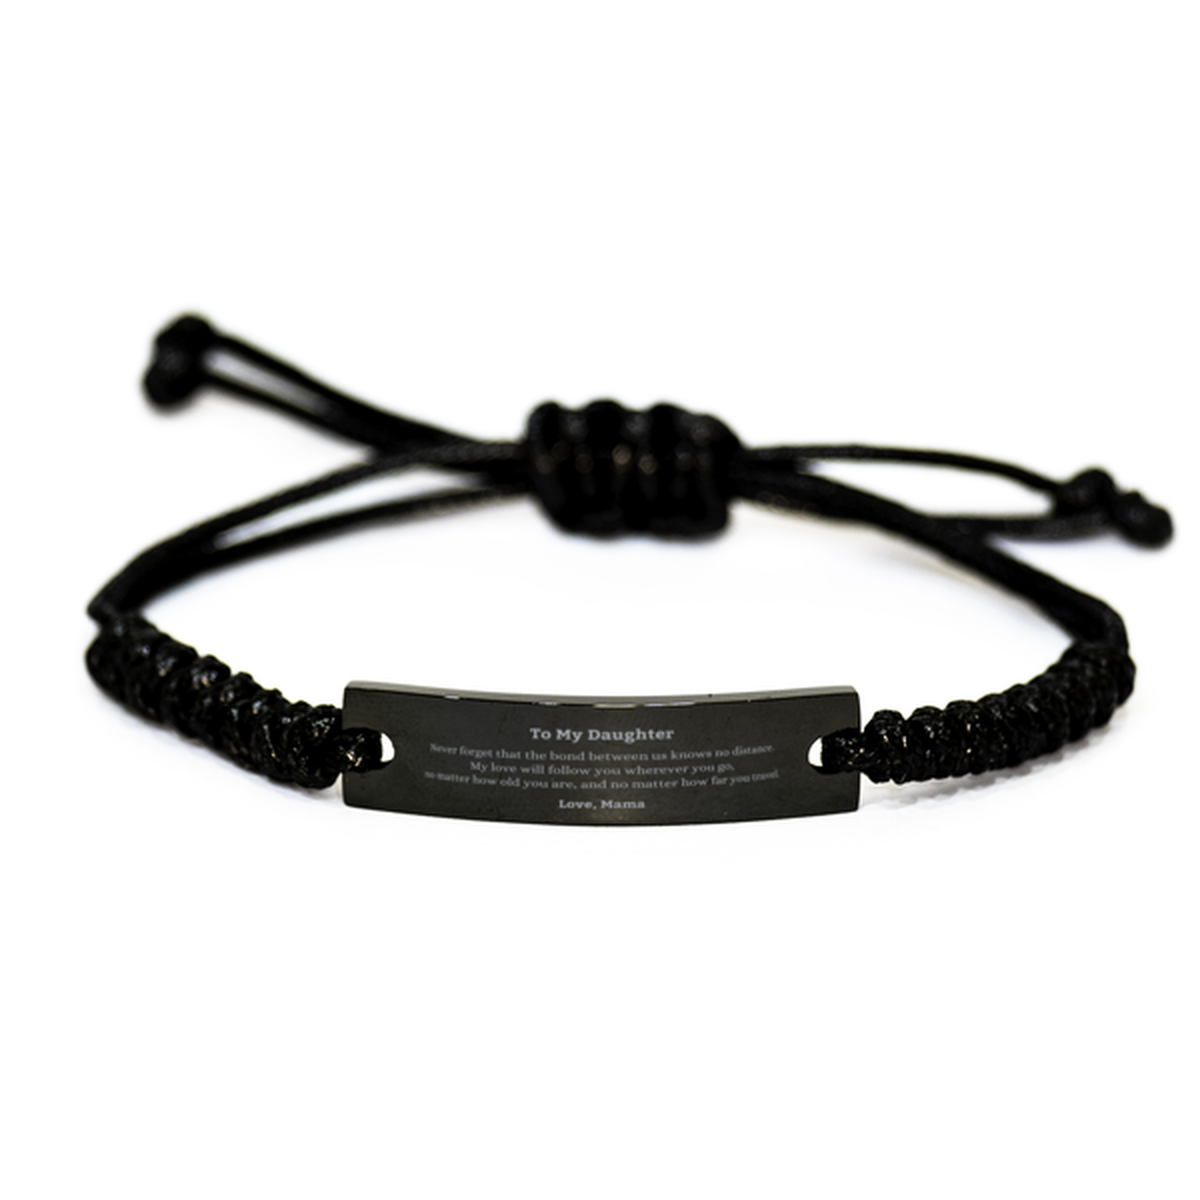 Daughter Birthday Gifts from Mama, Adjustable Black Rope Bracelet for Daughter Christmas Graduation Unique Gifts Daughter Never forget that the bond between us knows no distance. Love, Mama